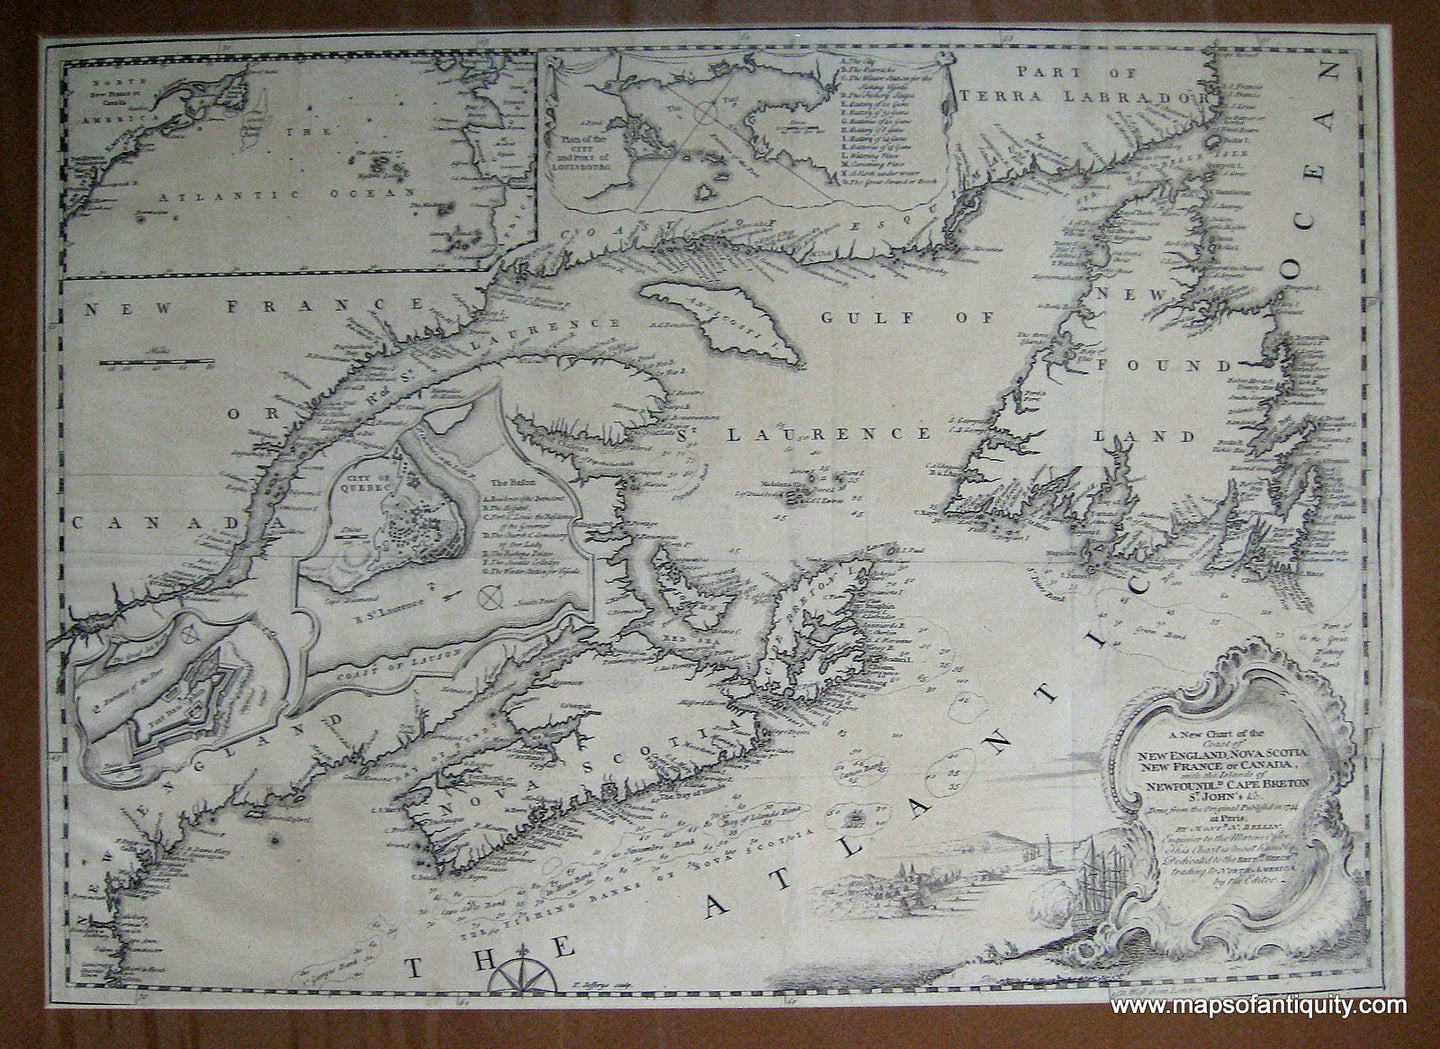 Black-and-White-Antique-Map-A-New-Chart-of-the-Coast-of-New-England-Nova-Scotia-New-France-or-Canada-with-the-Islands-of-Newfoundland-Cape-Breton-St.-John's-etc.-**********-North-America-Canada-1746-Gentleman's-Magazine-Maps-Of-Antiquity